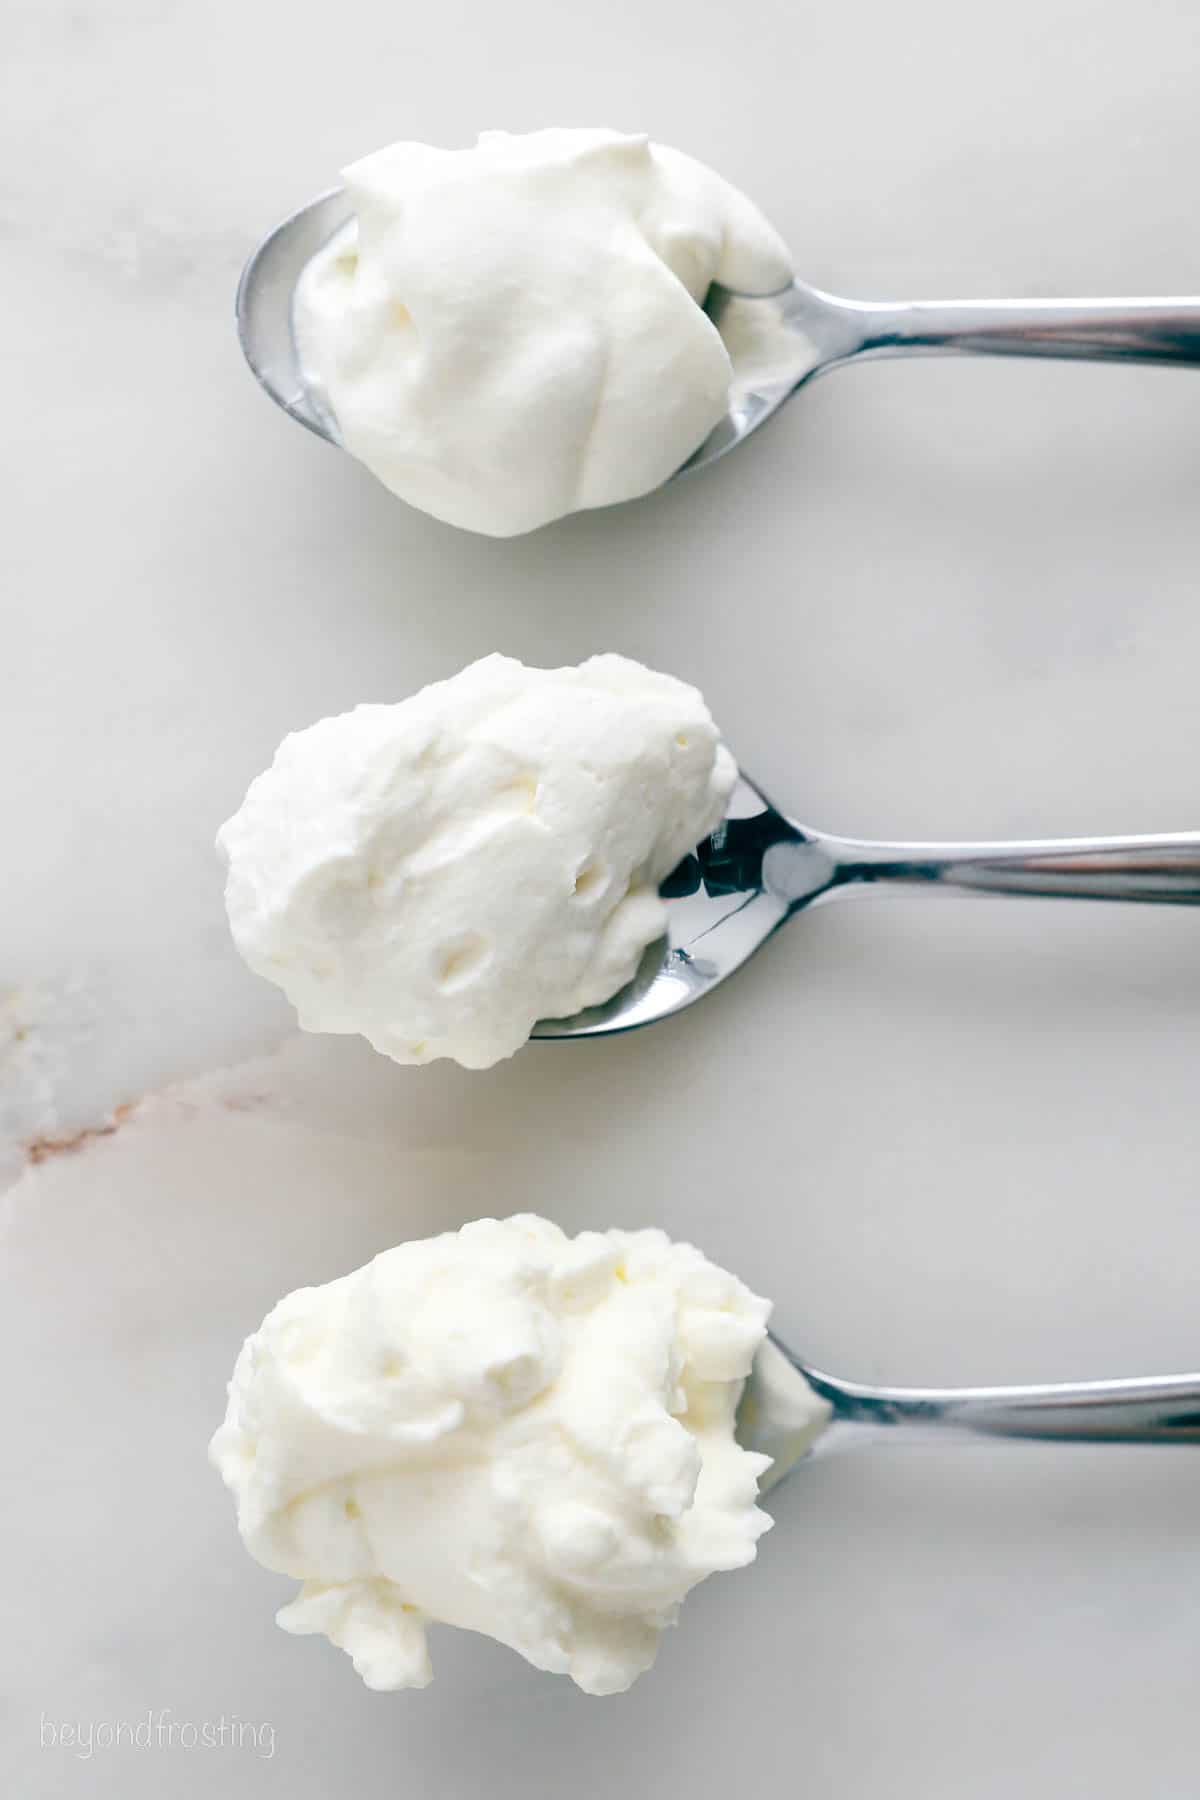 Three spoons showing the various stages of whipped cream, soft peaks, stiff peaks and overbeaten